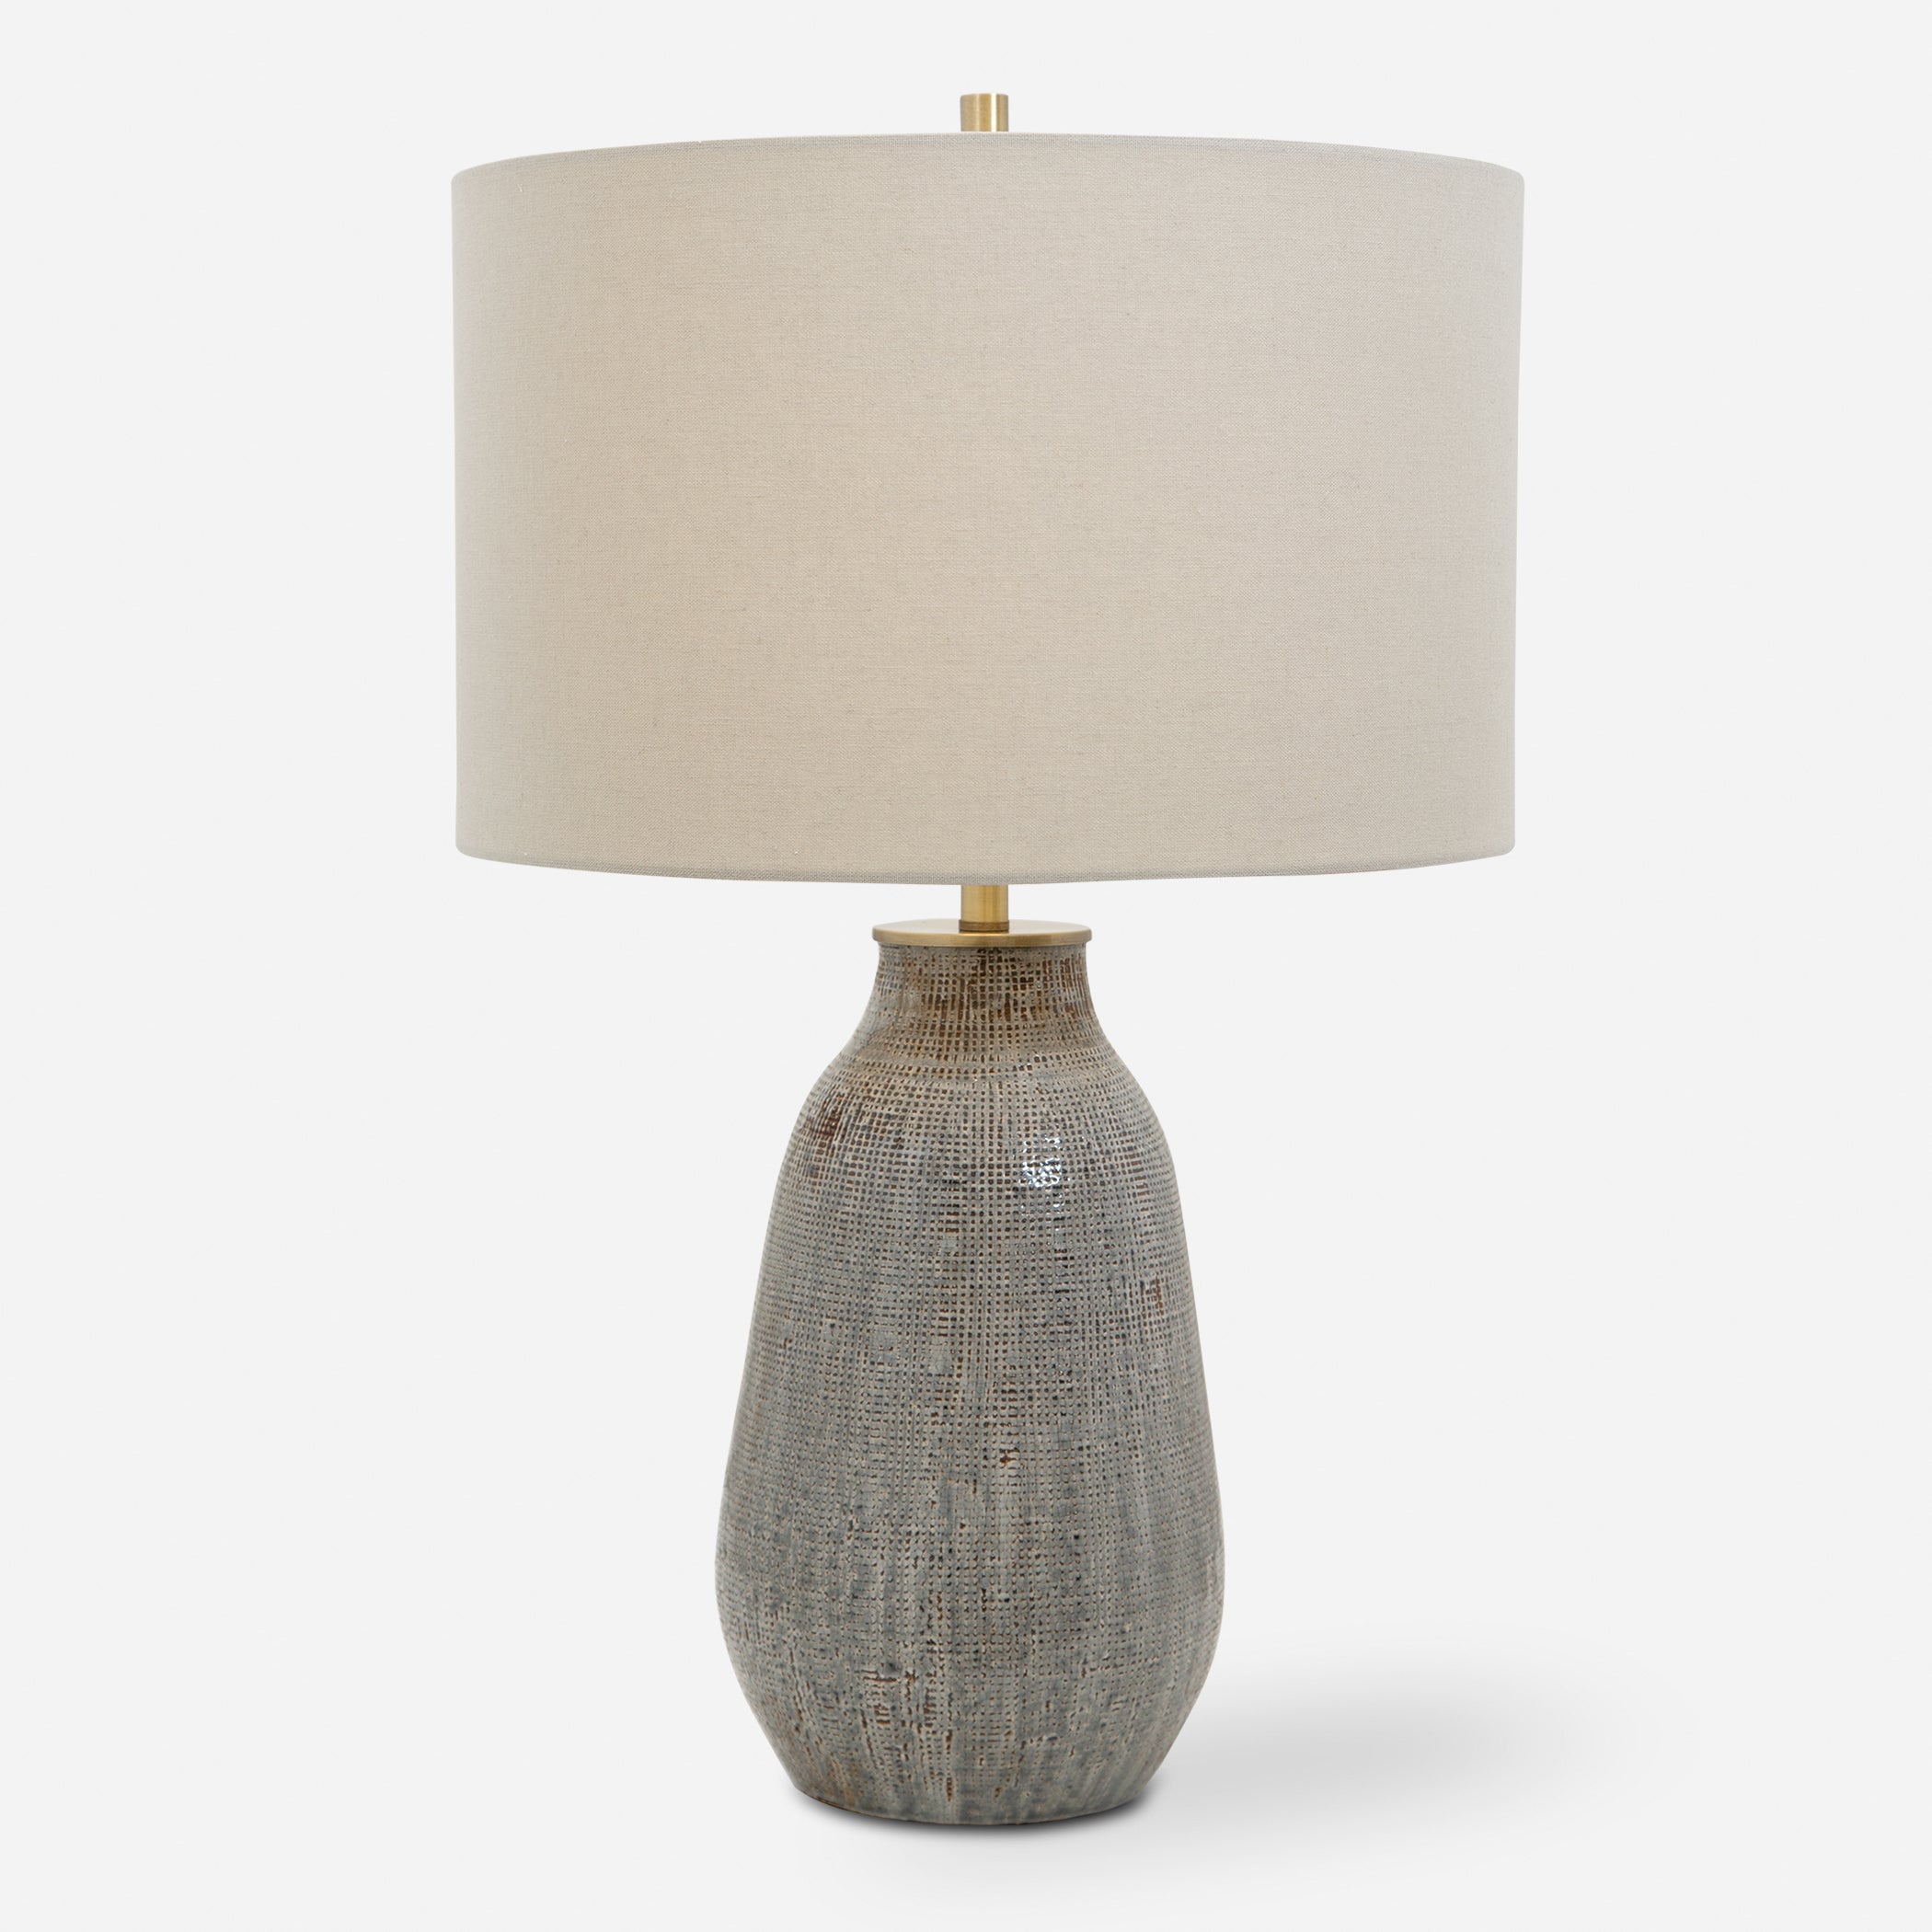 Uttermost Monacan Gray Textured Table Lamp Gray Textured Table Lamp Uttermost   